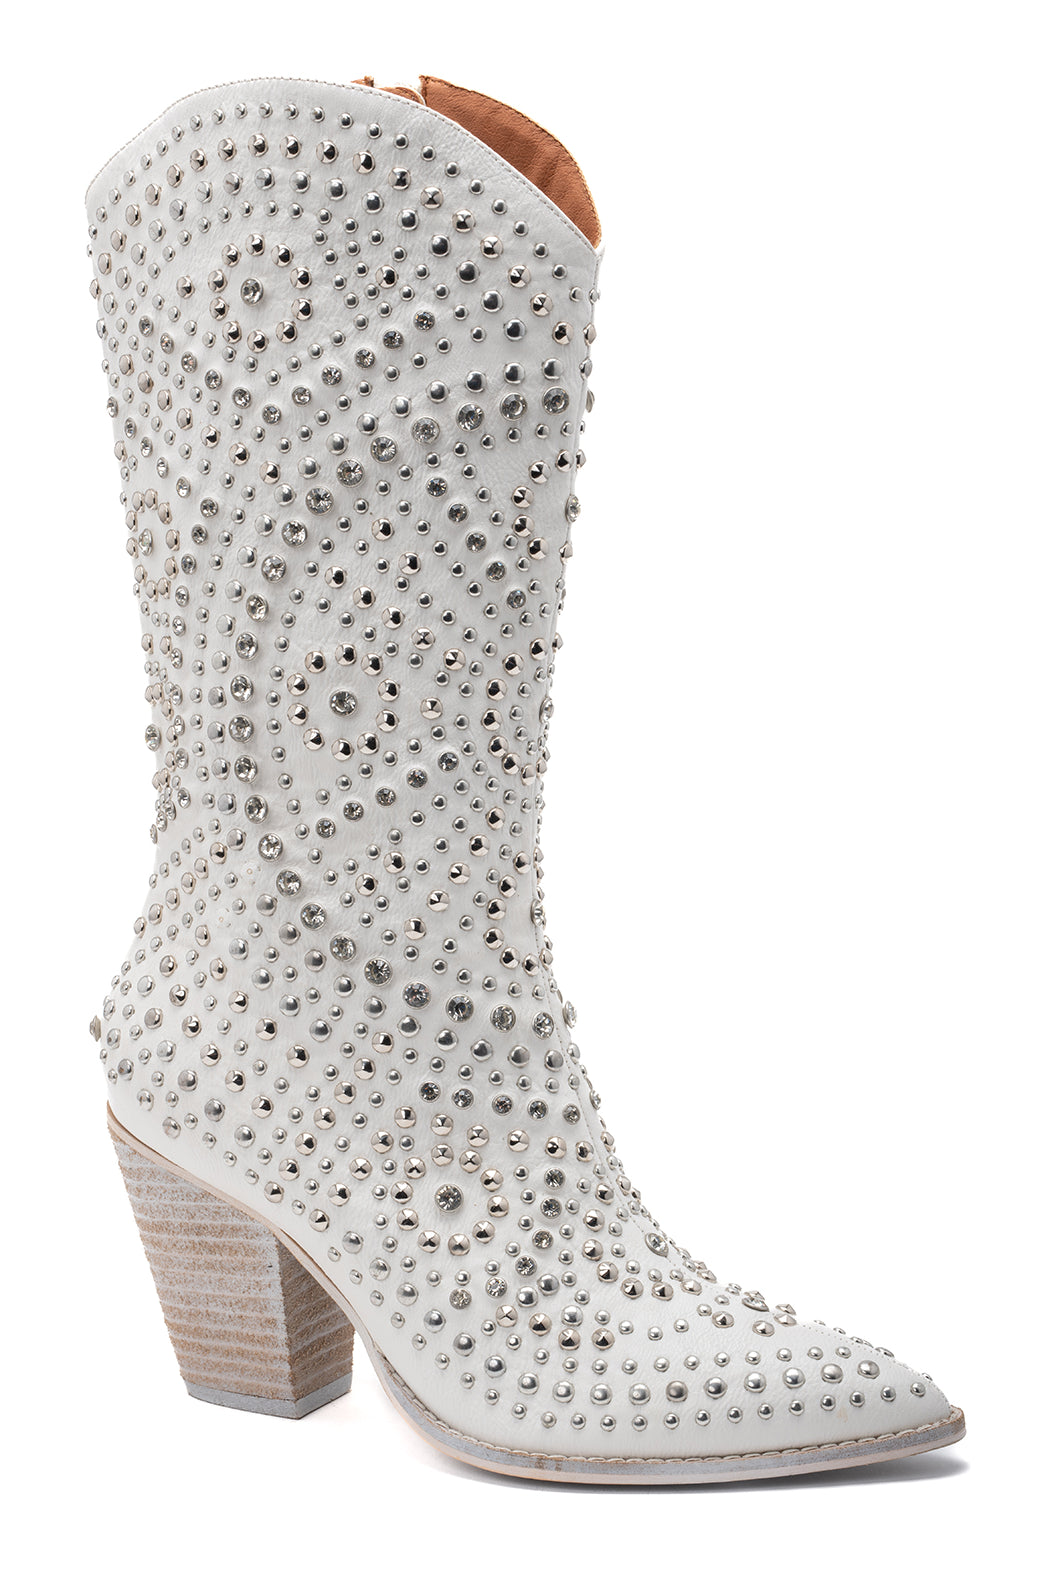 Corky's Boot Scootin, White-Boots-Krush Kandy, Women's Online Fashion Boutique Located in Phoenix, Arizona (Scottsdale Area)